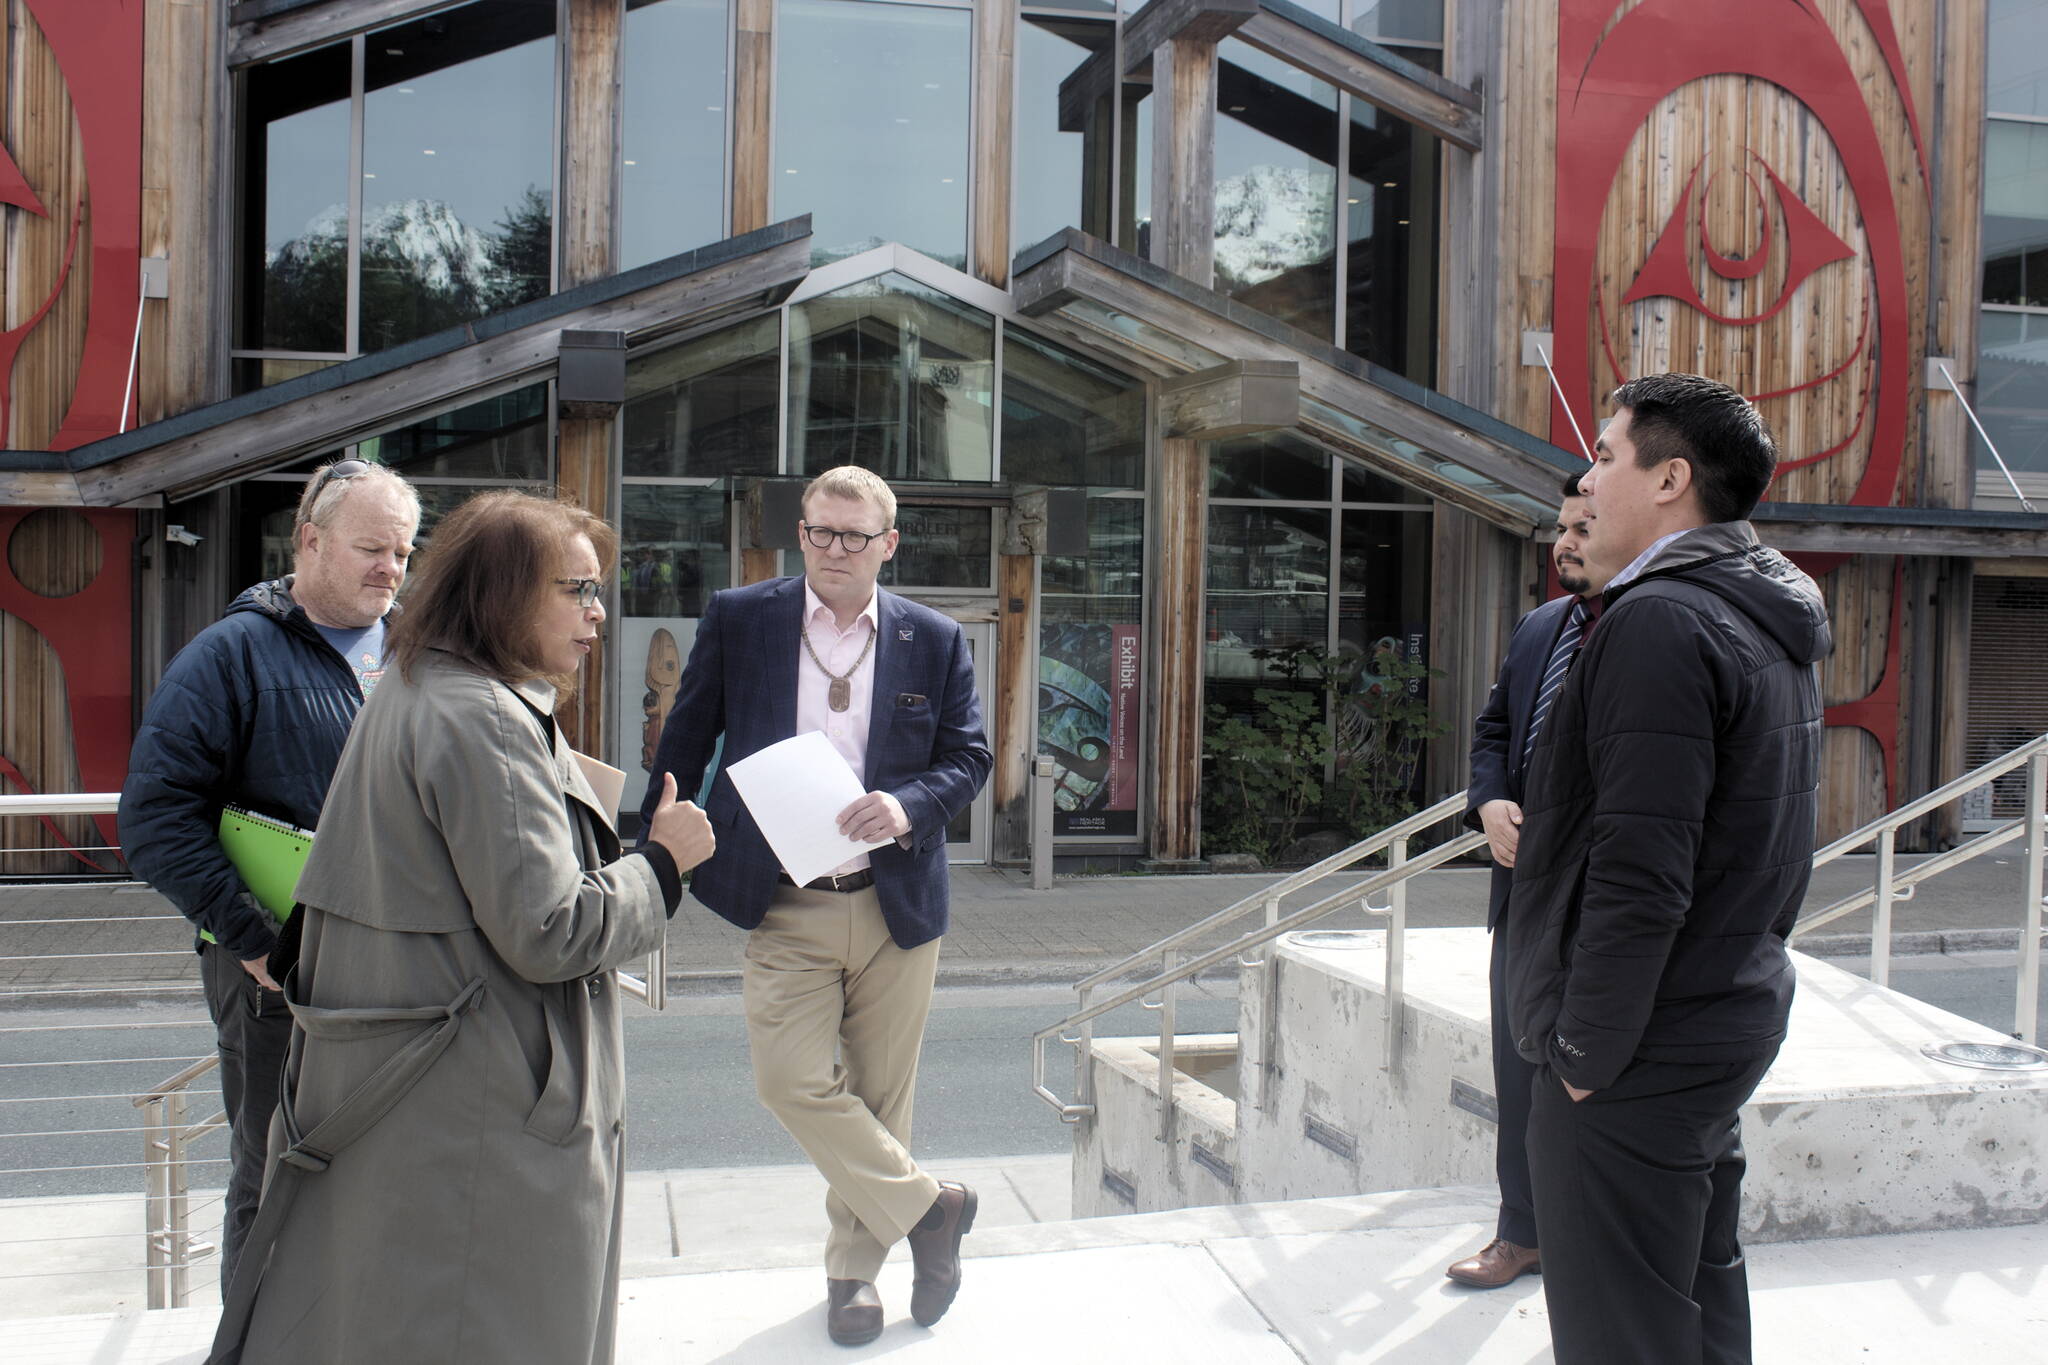 Assistant U.S. Commerce Secretary Alejandra Castillo, second from left, meets Southeast Alaska Native leaders at the Sealaska Heritage Plaza on Wednesday to discuss the Spruce Roots project, which is among 60 finalists seeking a share of a $1 billion federal development grant. Spruce Roots is hoping to be among the 20-30 winners who will each receive up to $100 million, with the project seeking to create 250 new jobs, $22 million in new annual economic activity and $20 million in new infrastructure. Mark Sabbatini / Juneau Empire